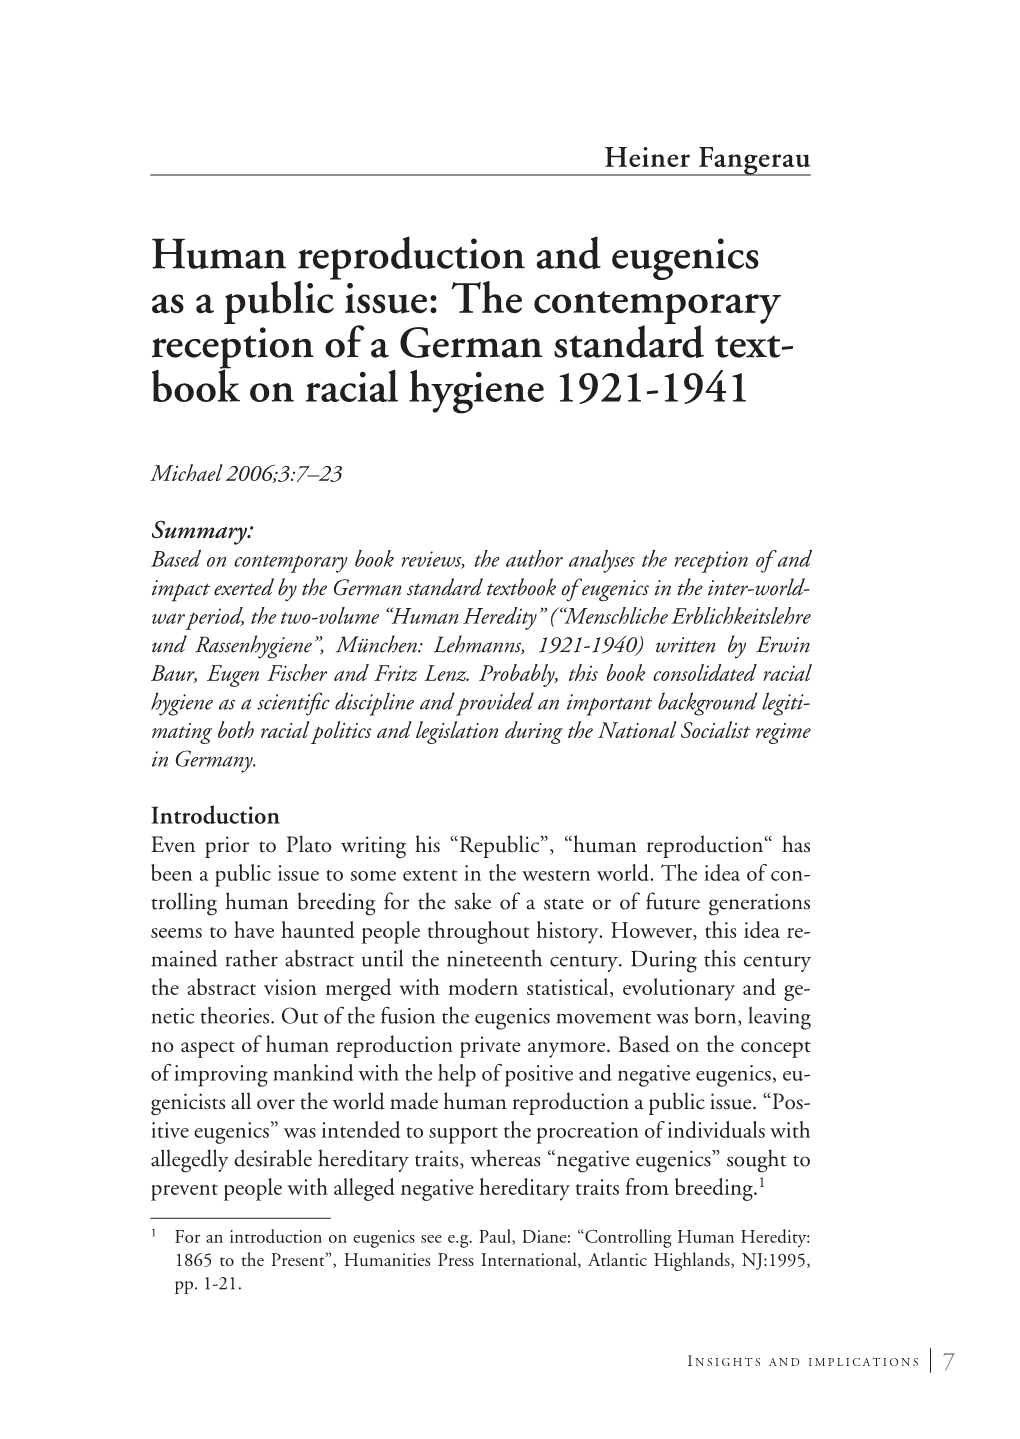 Human Reproduction and Eugenics As a Public Issue: the Contemporary Reception of a German Standard Text- Book on Racial Hygiene 1921-1941